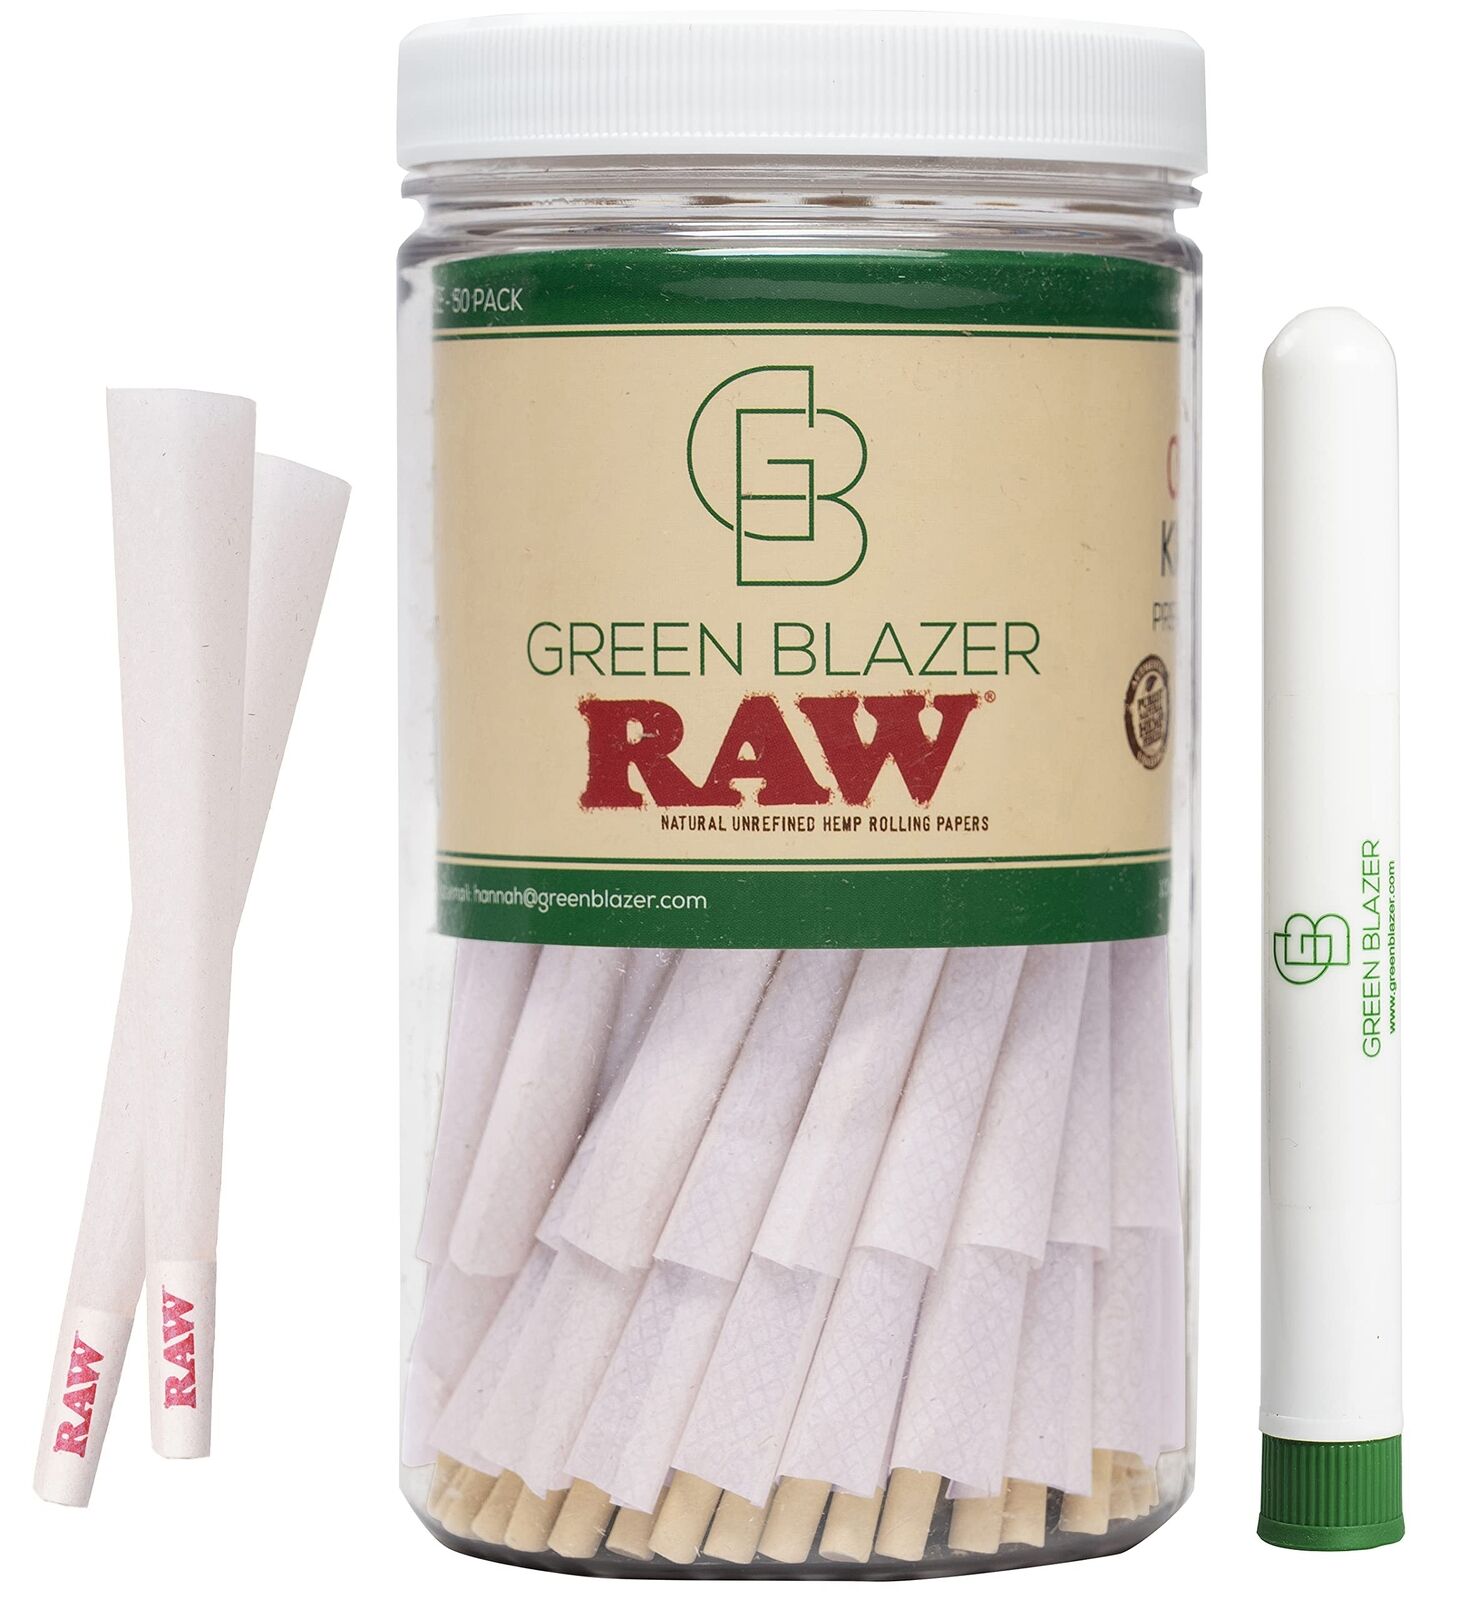 RAW Cones Organic King Size: 100 Pack - All Natural Hemp